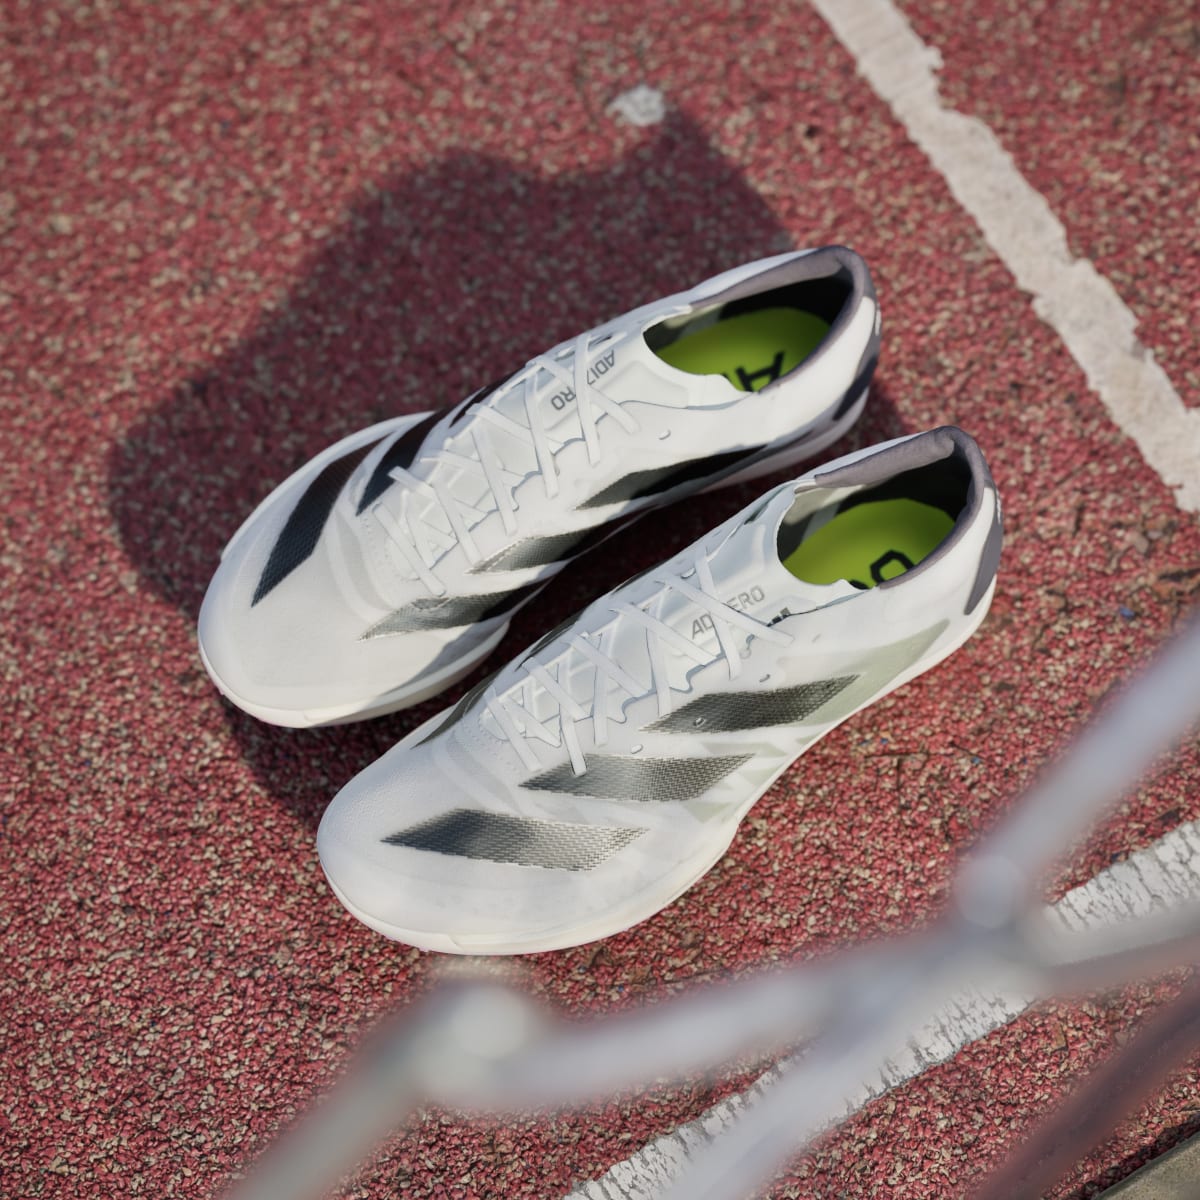 Adidas Adizero Ambition Track and Field Lightstrike Shoes. 7